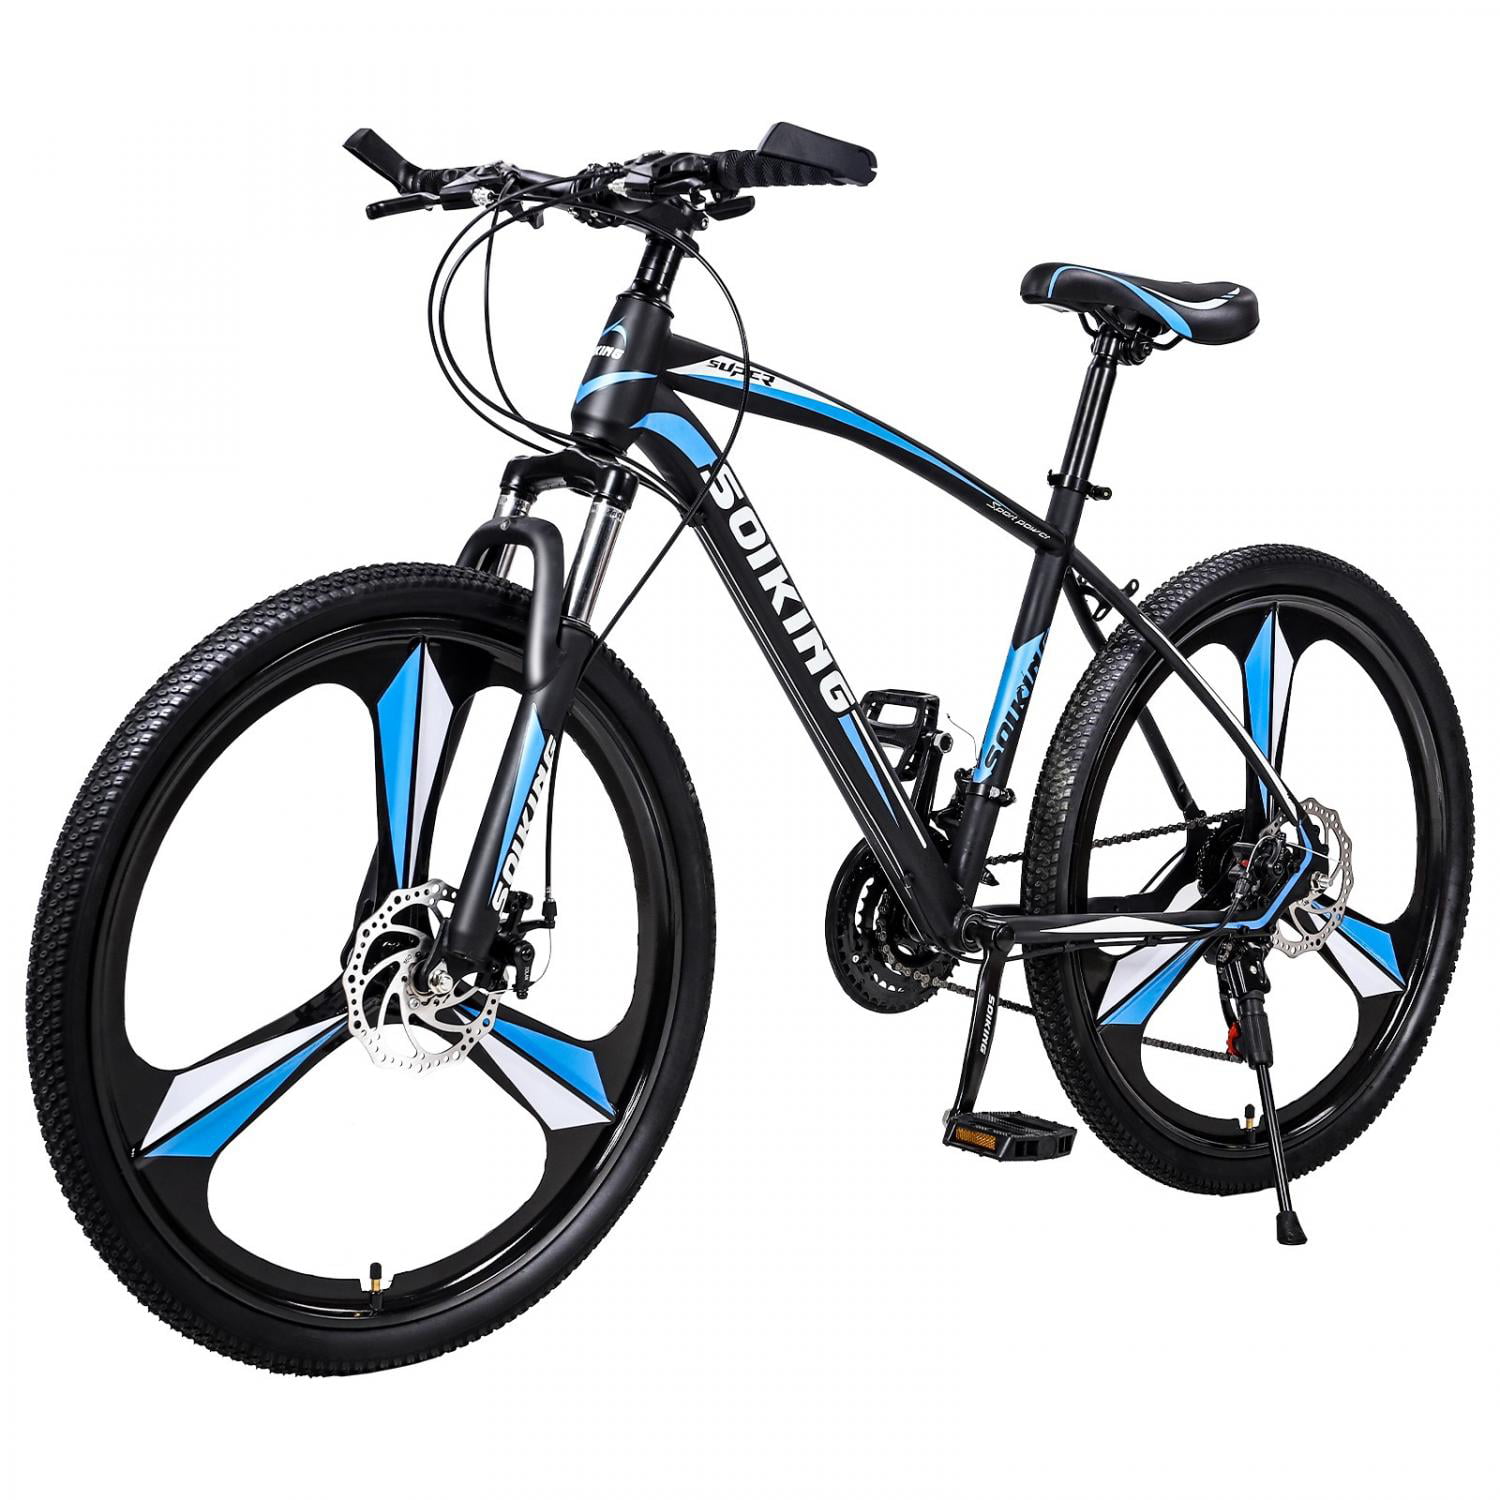 Black 1 【US Spot】 Road Bike Aluminum 700C Wheels Full Suspension Mountain Bike for Adult 21 Speed Shimano Shifter Disc Brake Mens or Womens Bicycle Cycling 